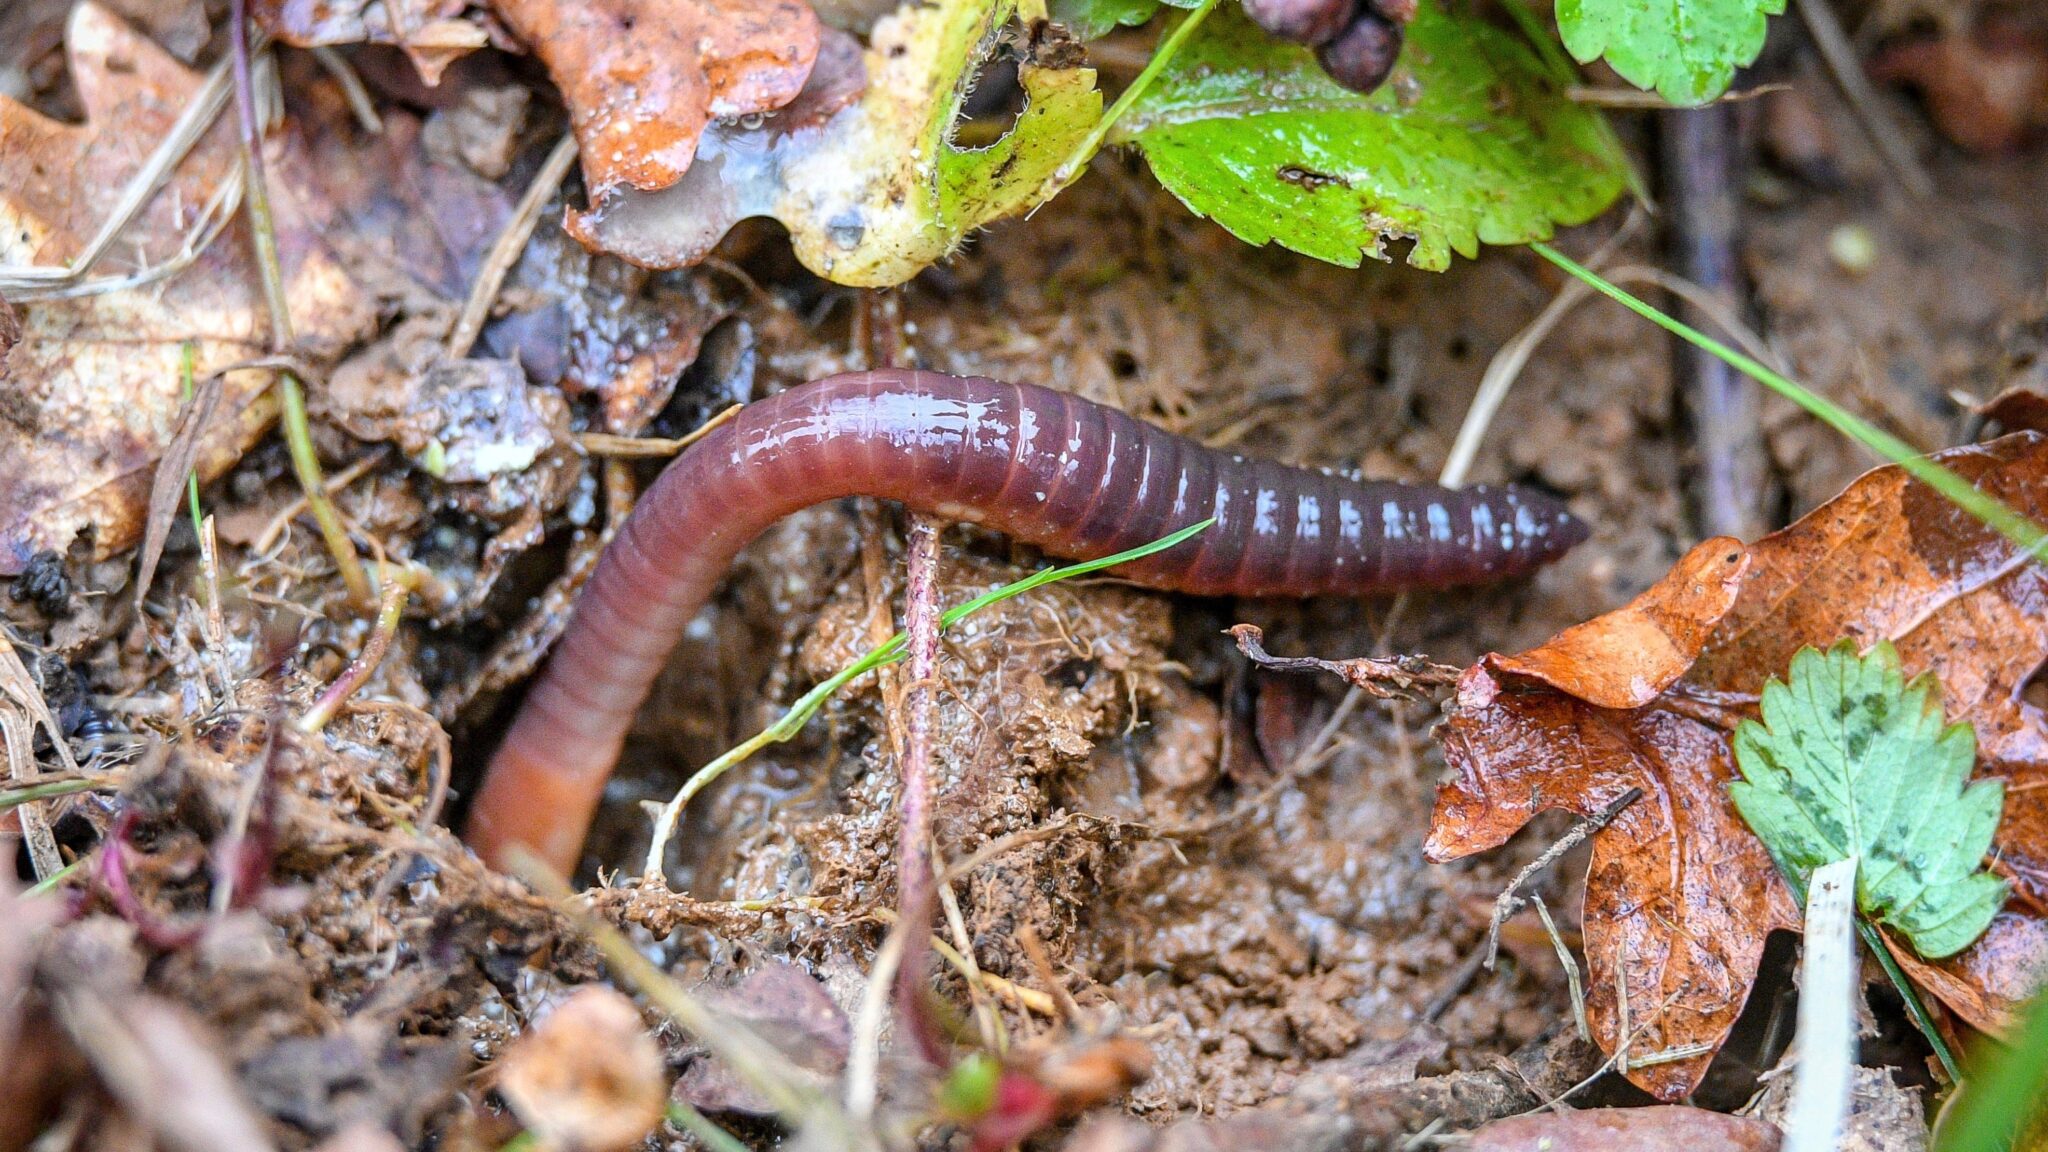 Study Finds Microplastics Stunt Earthworms’ Growth and Could Harm Soil Ecosystems